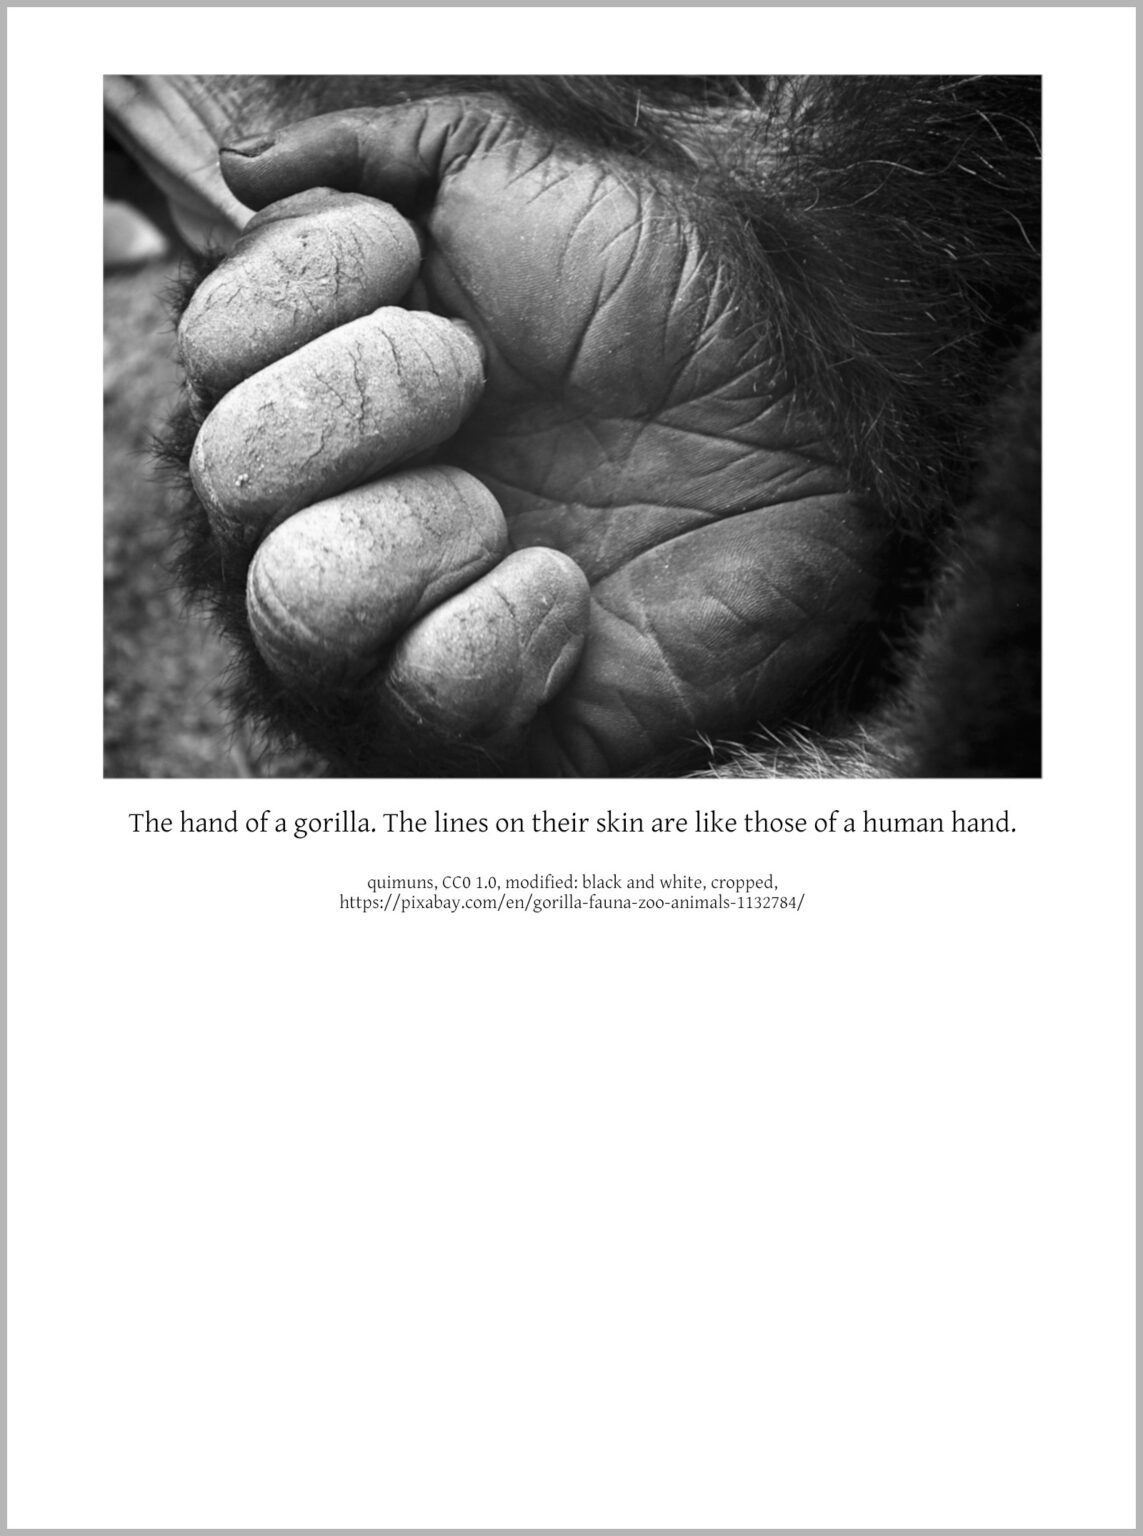 From the epilogue about Great Apes